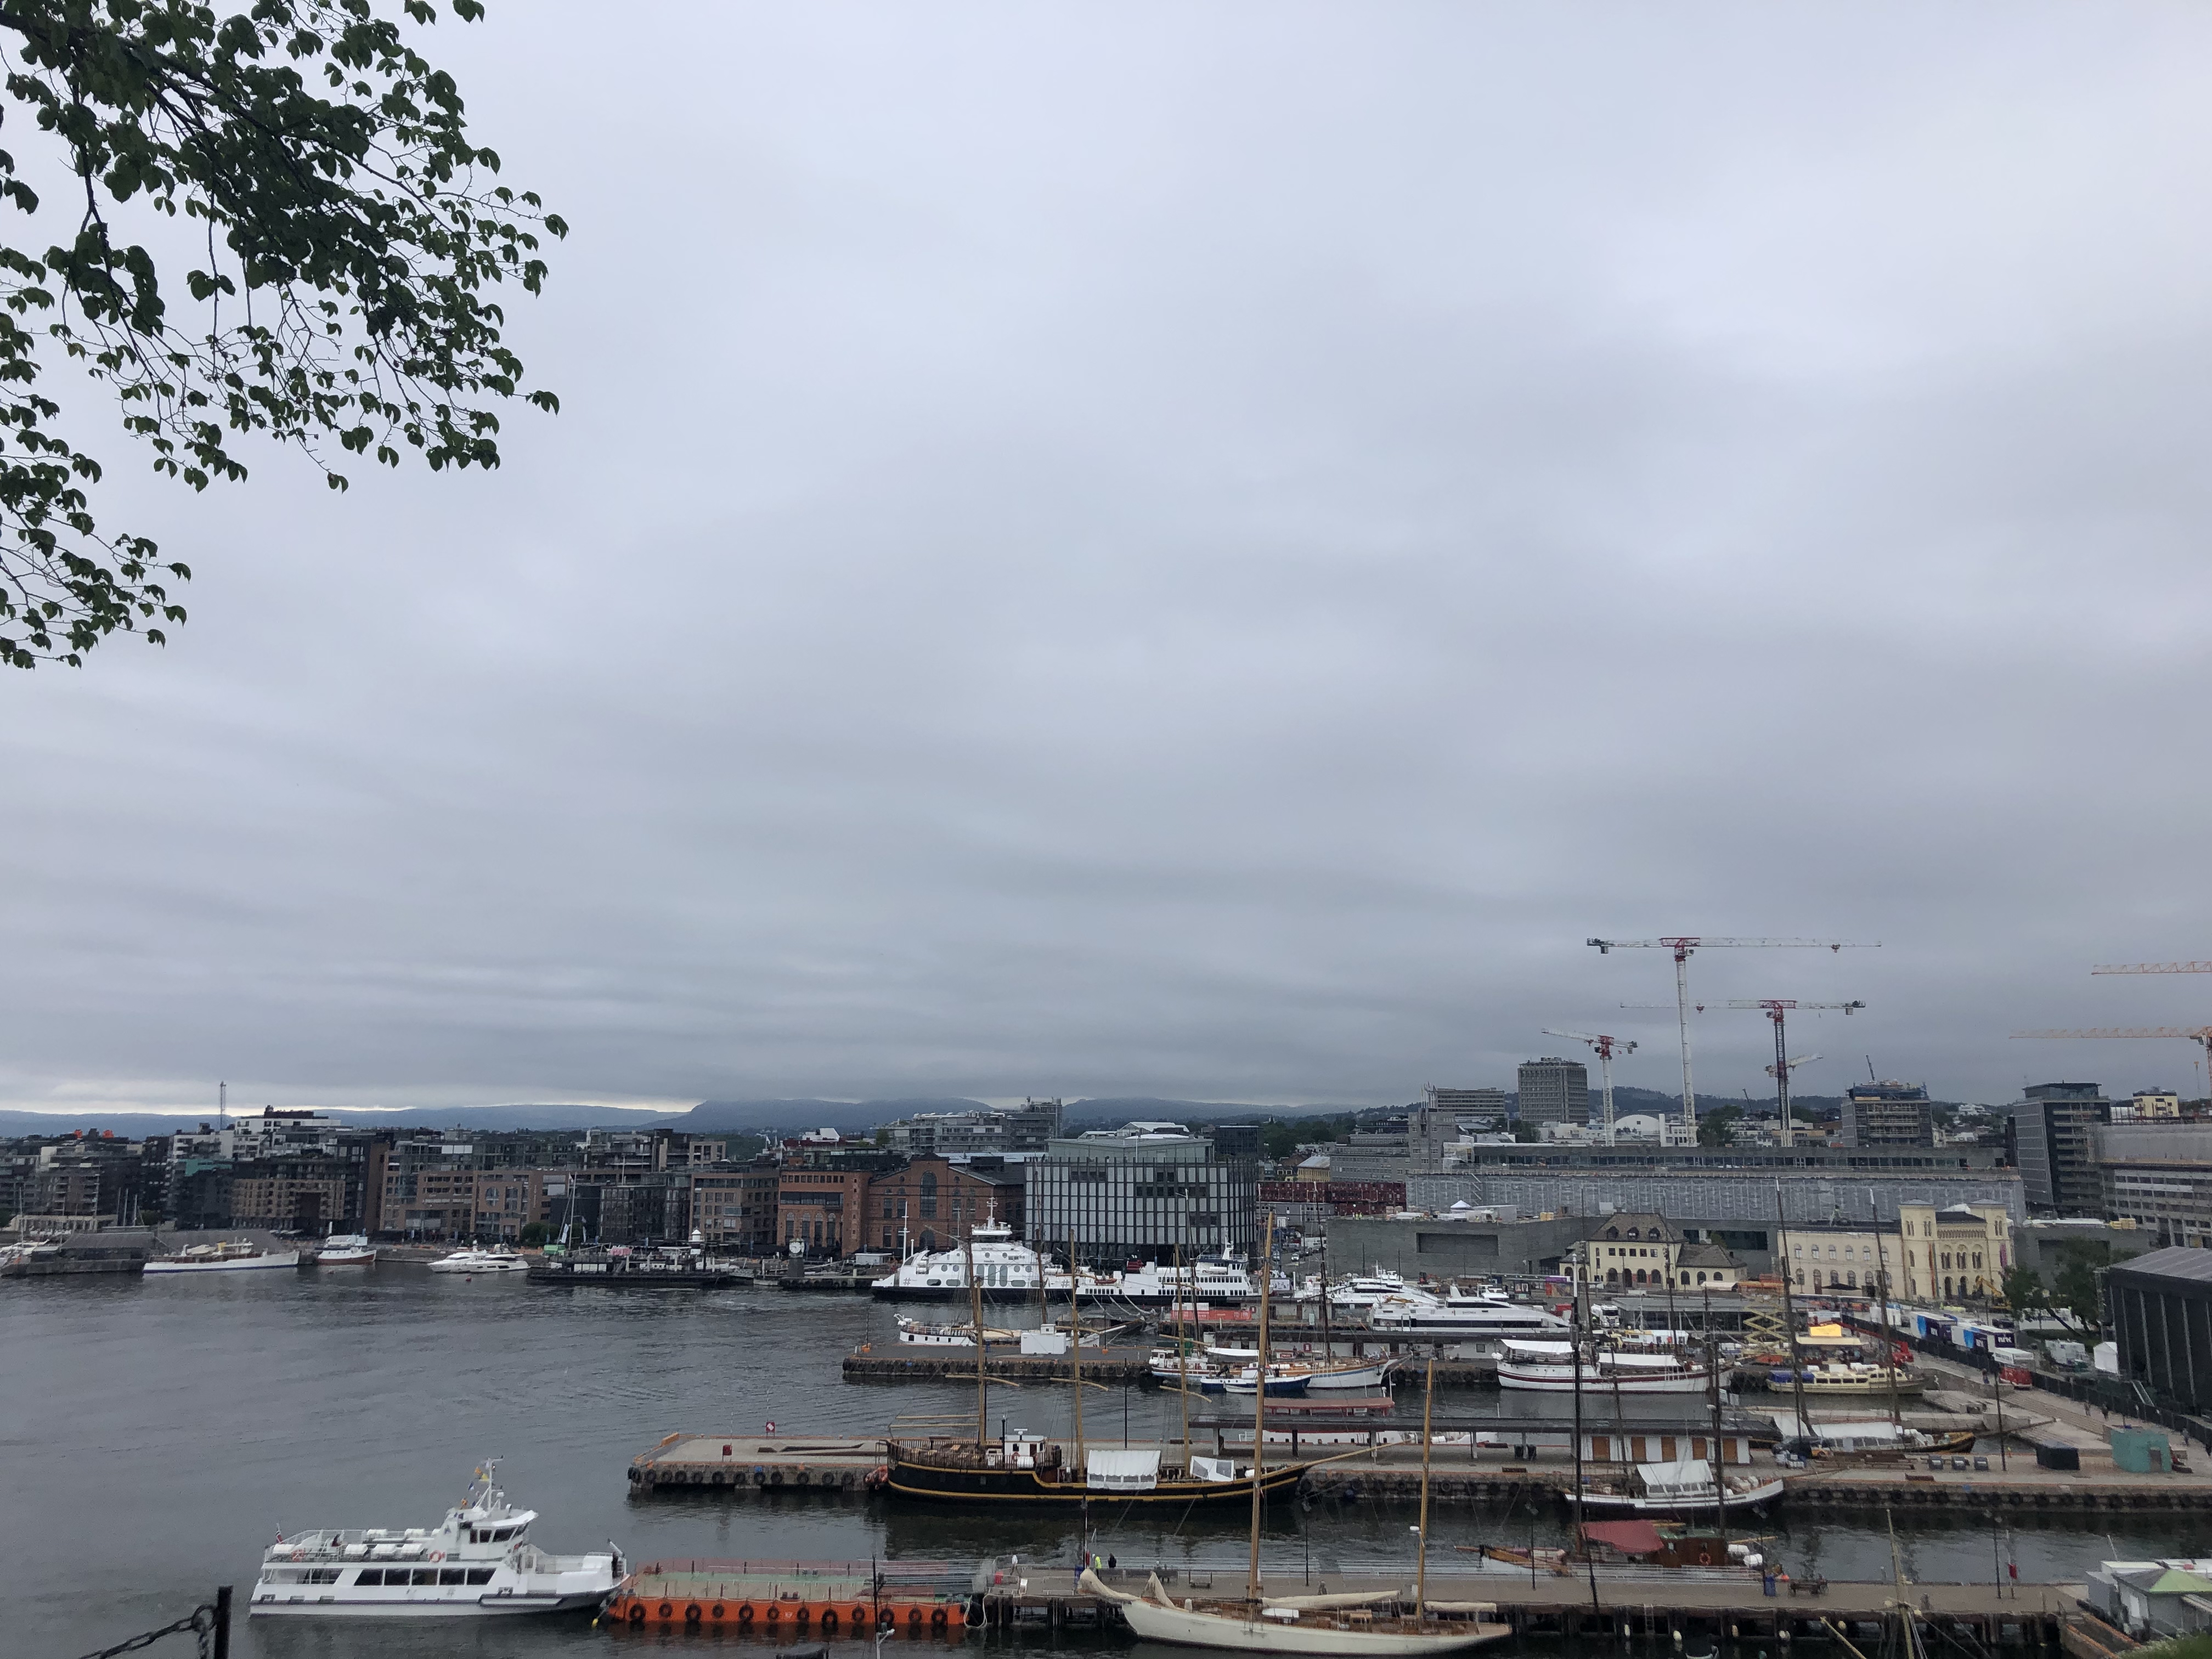 View of downtown Oslo with water and a mix of old and new buildings.